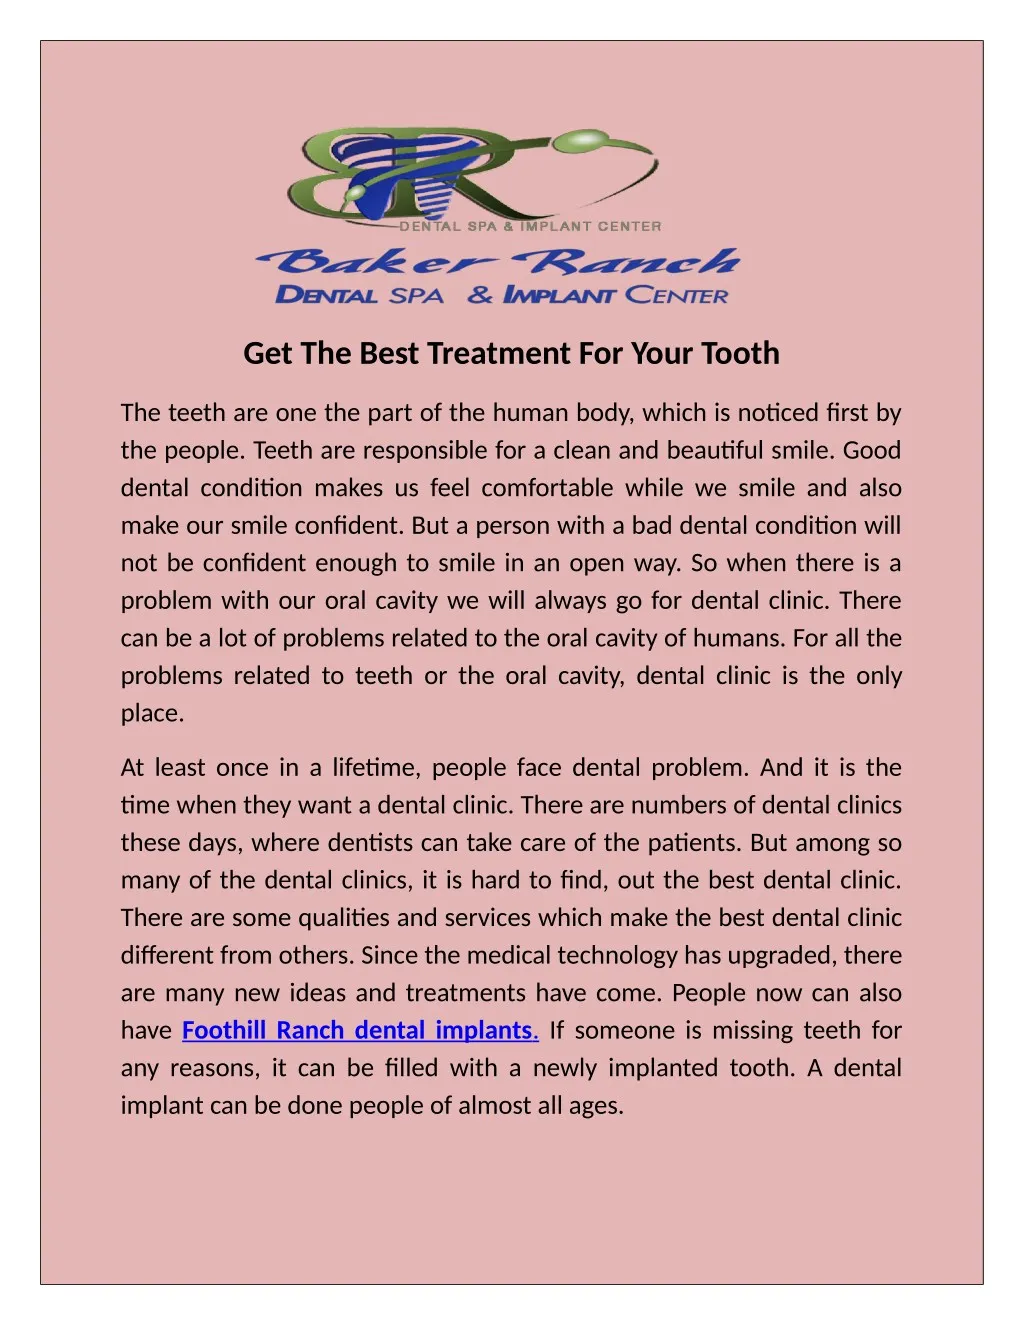 get the best treatment for your tooth